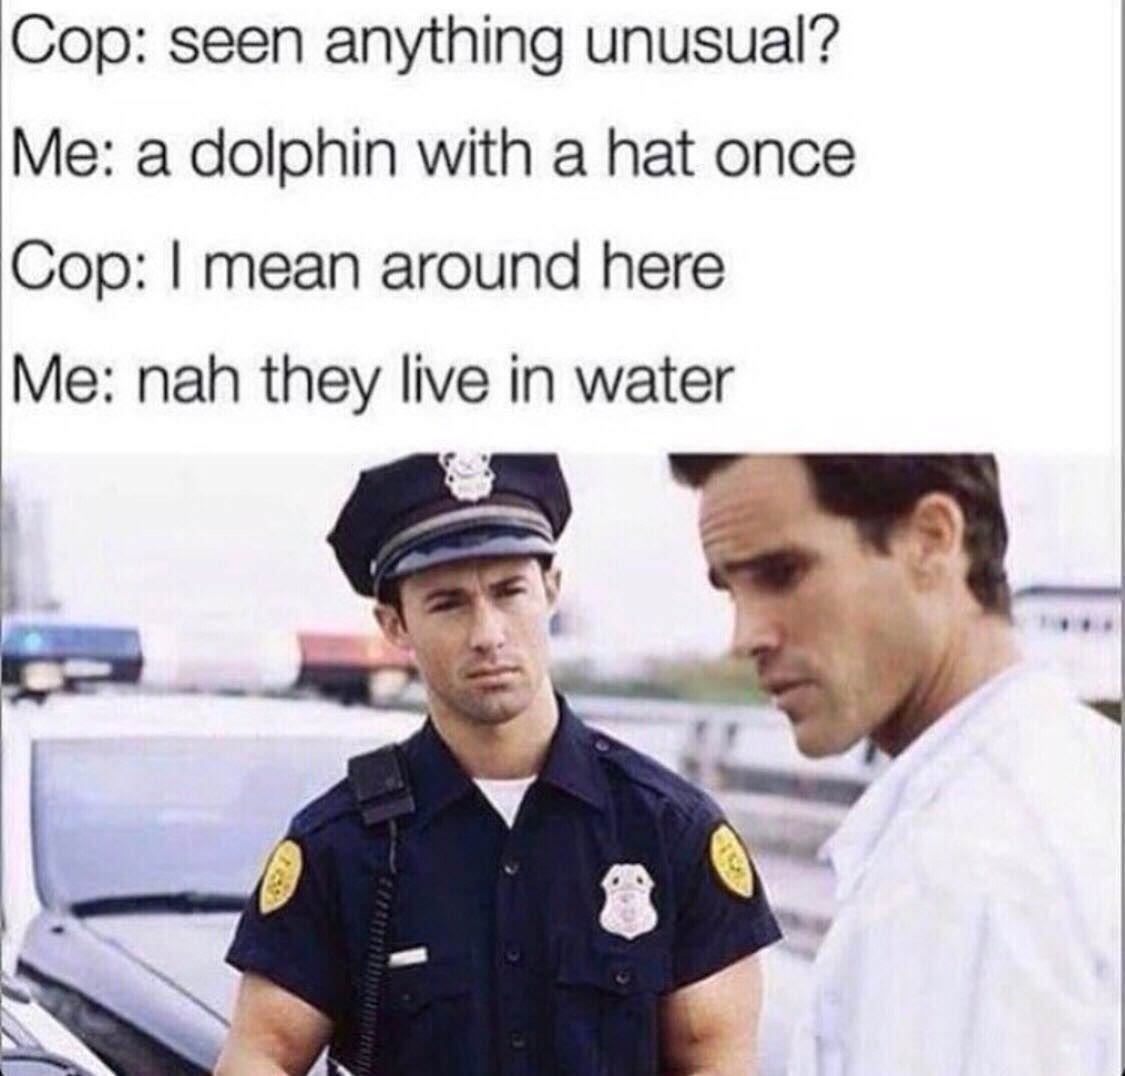 memes - seen anything unusual meme - Cop seen anything unusual? Me a dolphin with a hat once Cop I mean around here Me nah they live in water